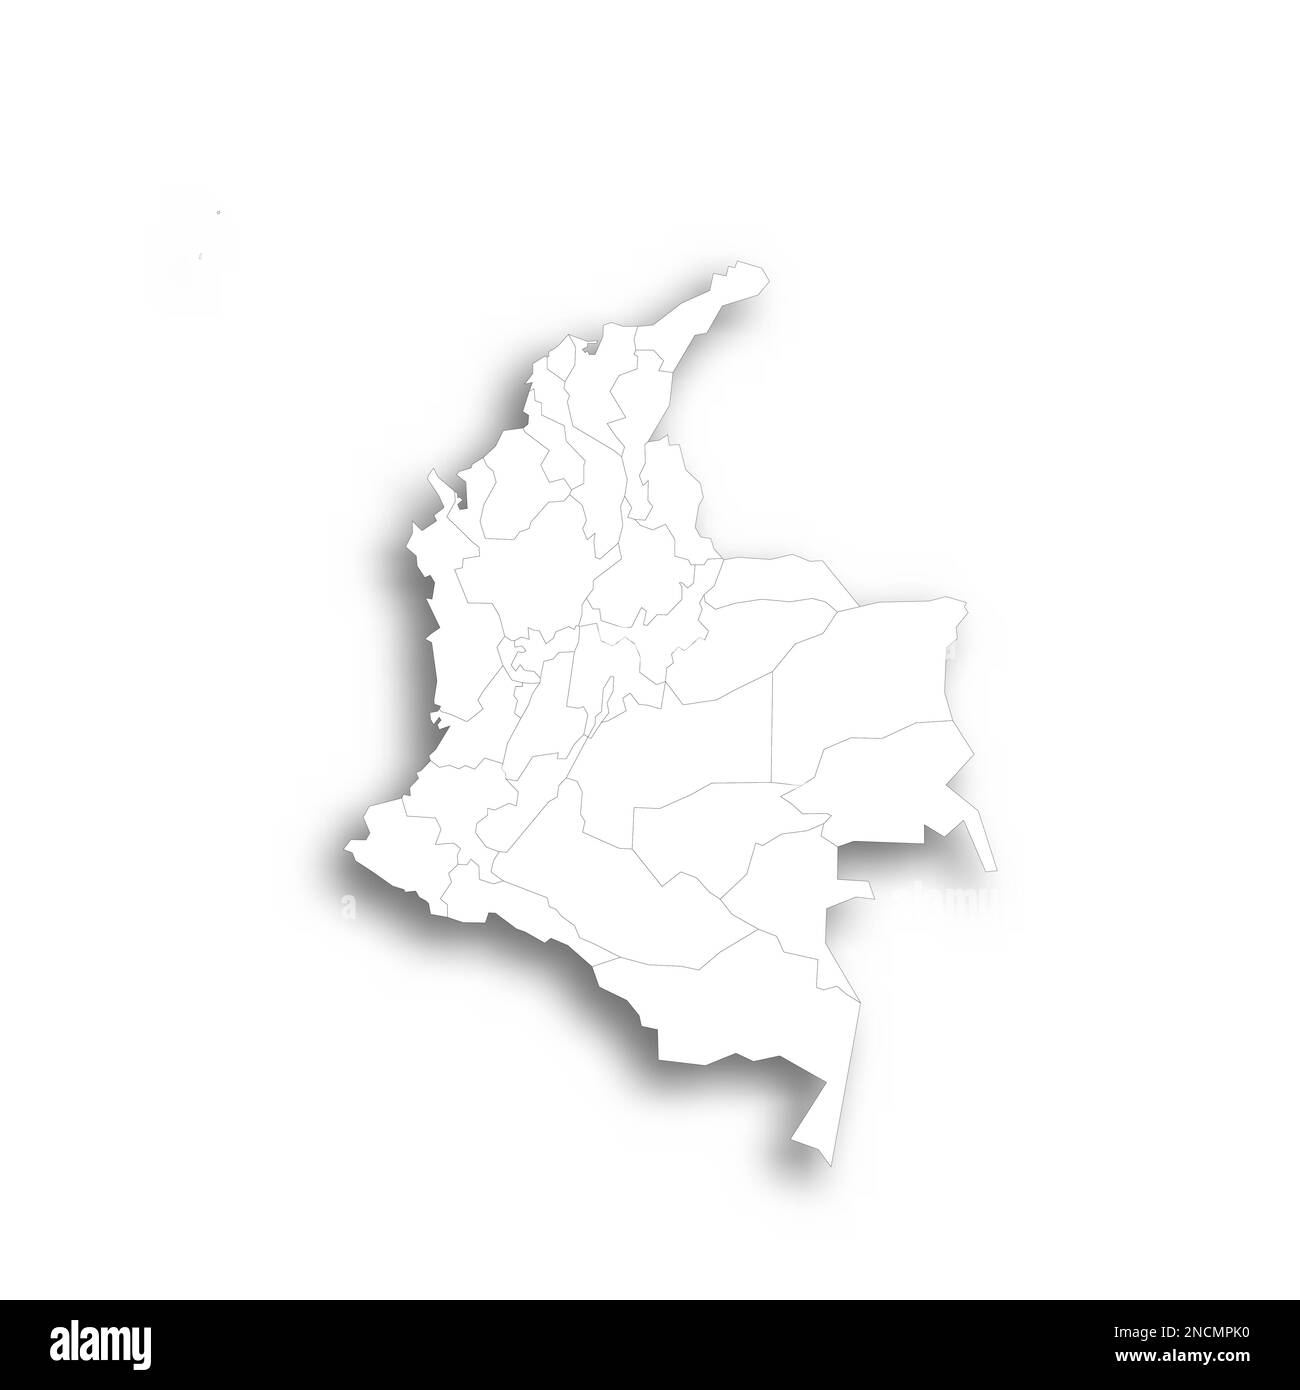 Colombia Political Map Of Administrative Divisions Departments And